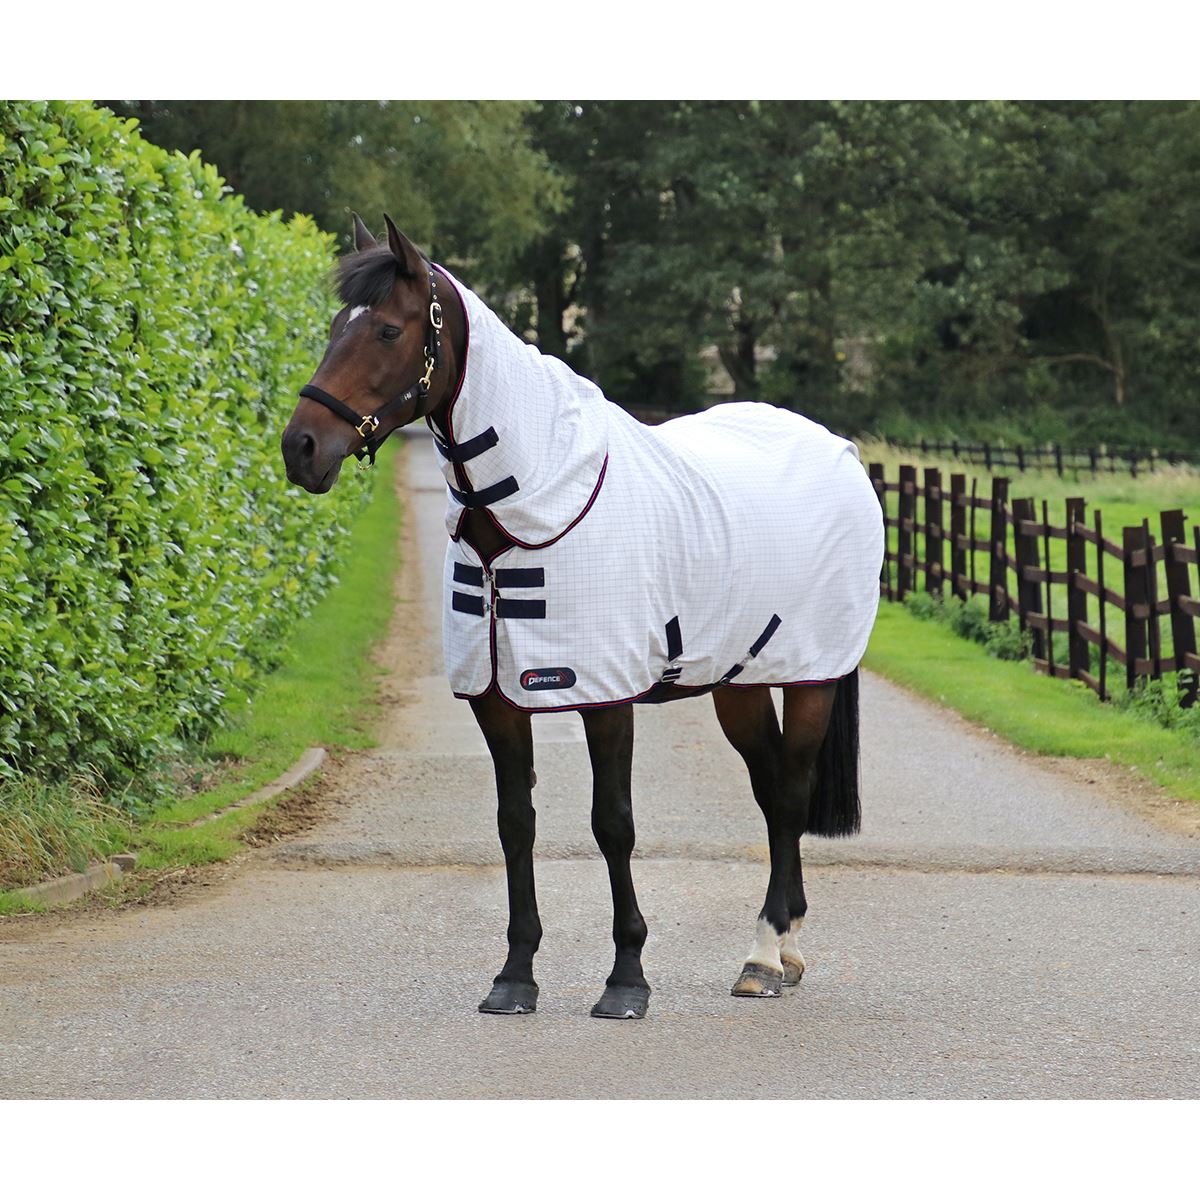 DefenceX System ProteX Summer Sheet - Just Horse Riders